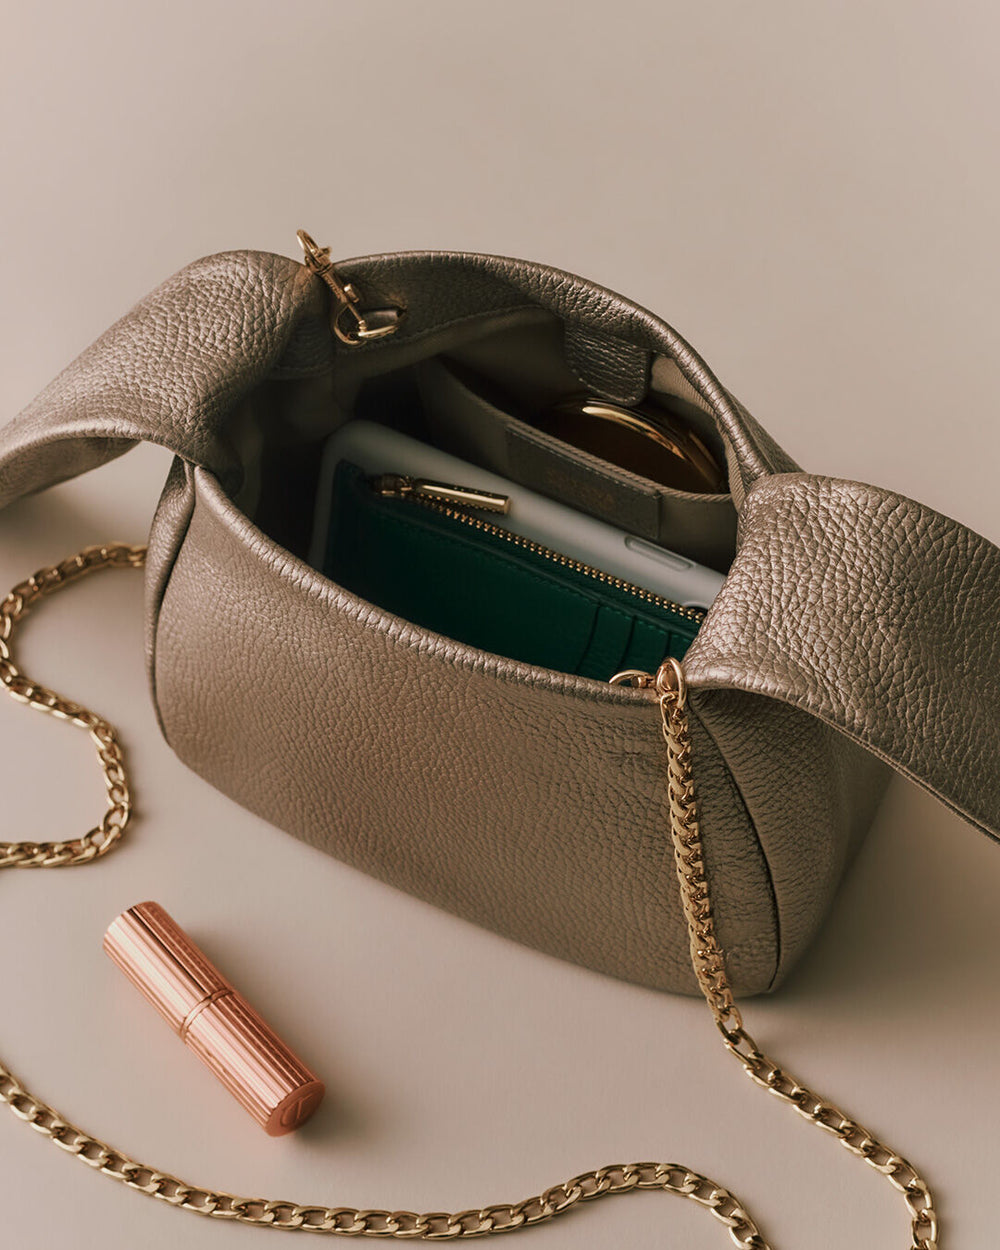 Open handbag with visible contents and a lipstick beside it.